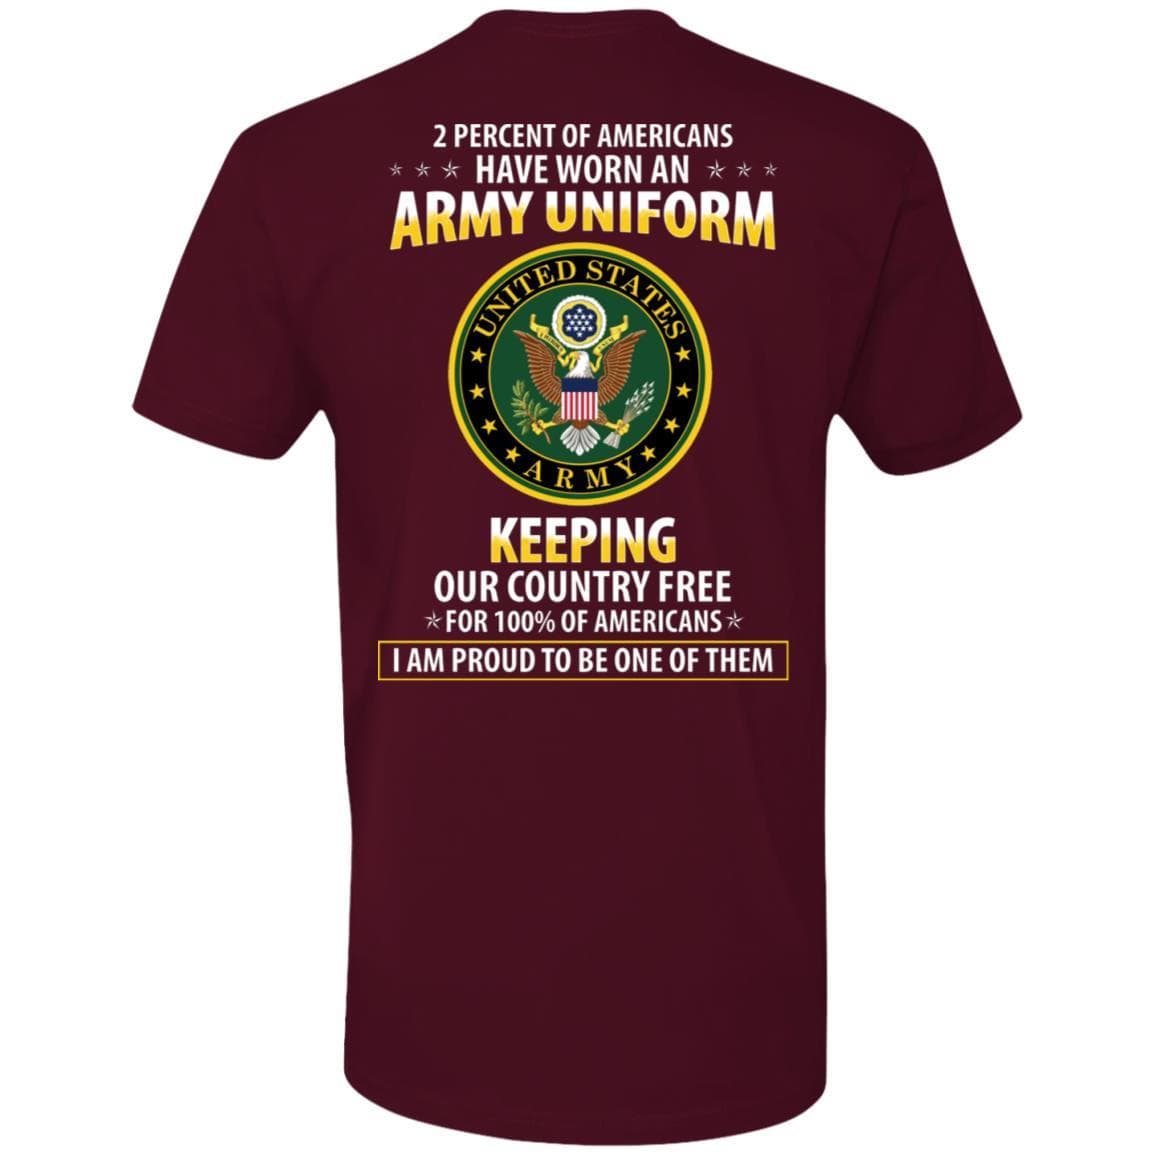 T-Shirt "2 percent of Americans have worn an ArmyUniform, keeping our country free, I am proud to be one of them" - Next Level Premium On Back-TShirt-Army-Veterans Nation